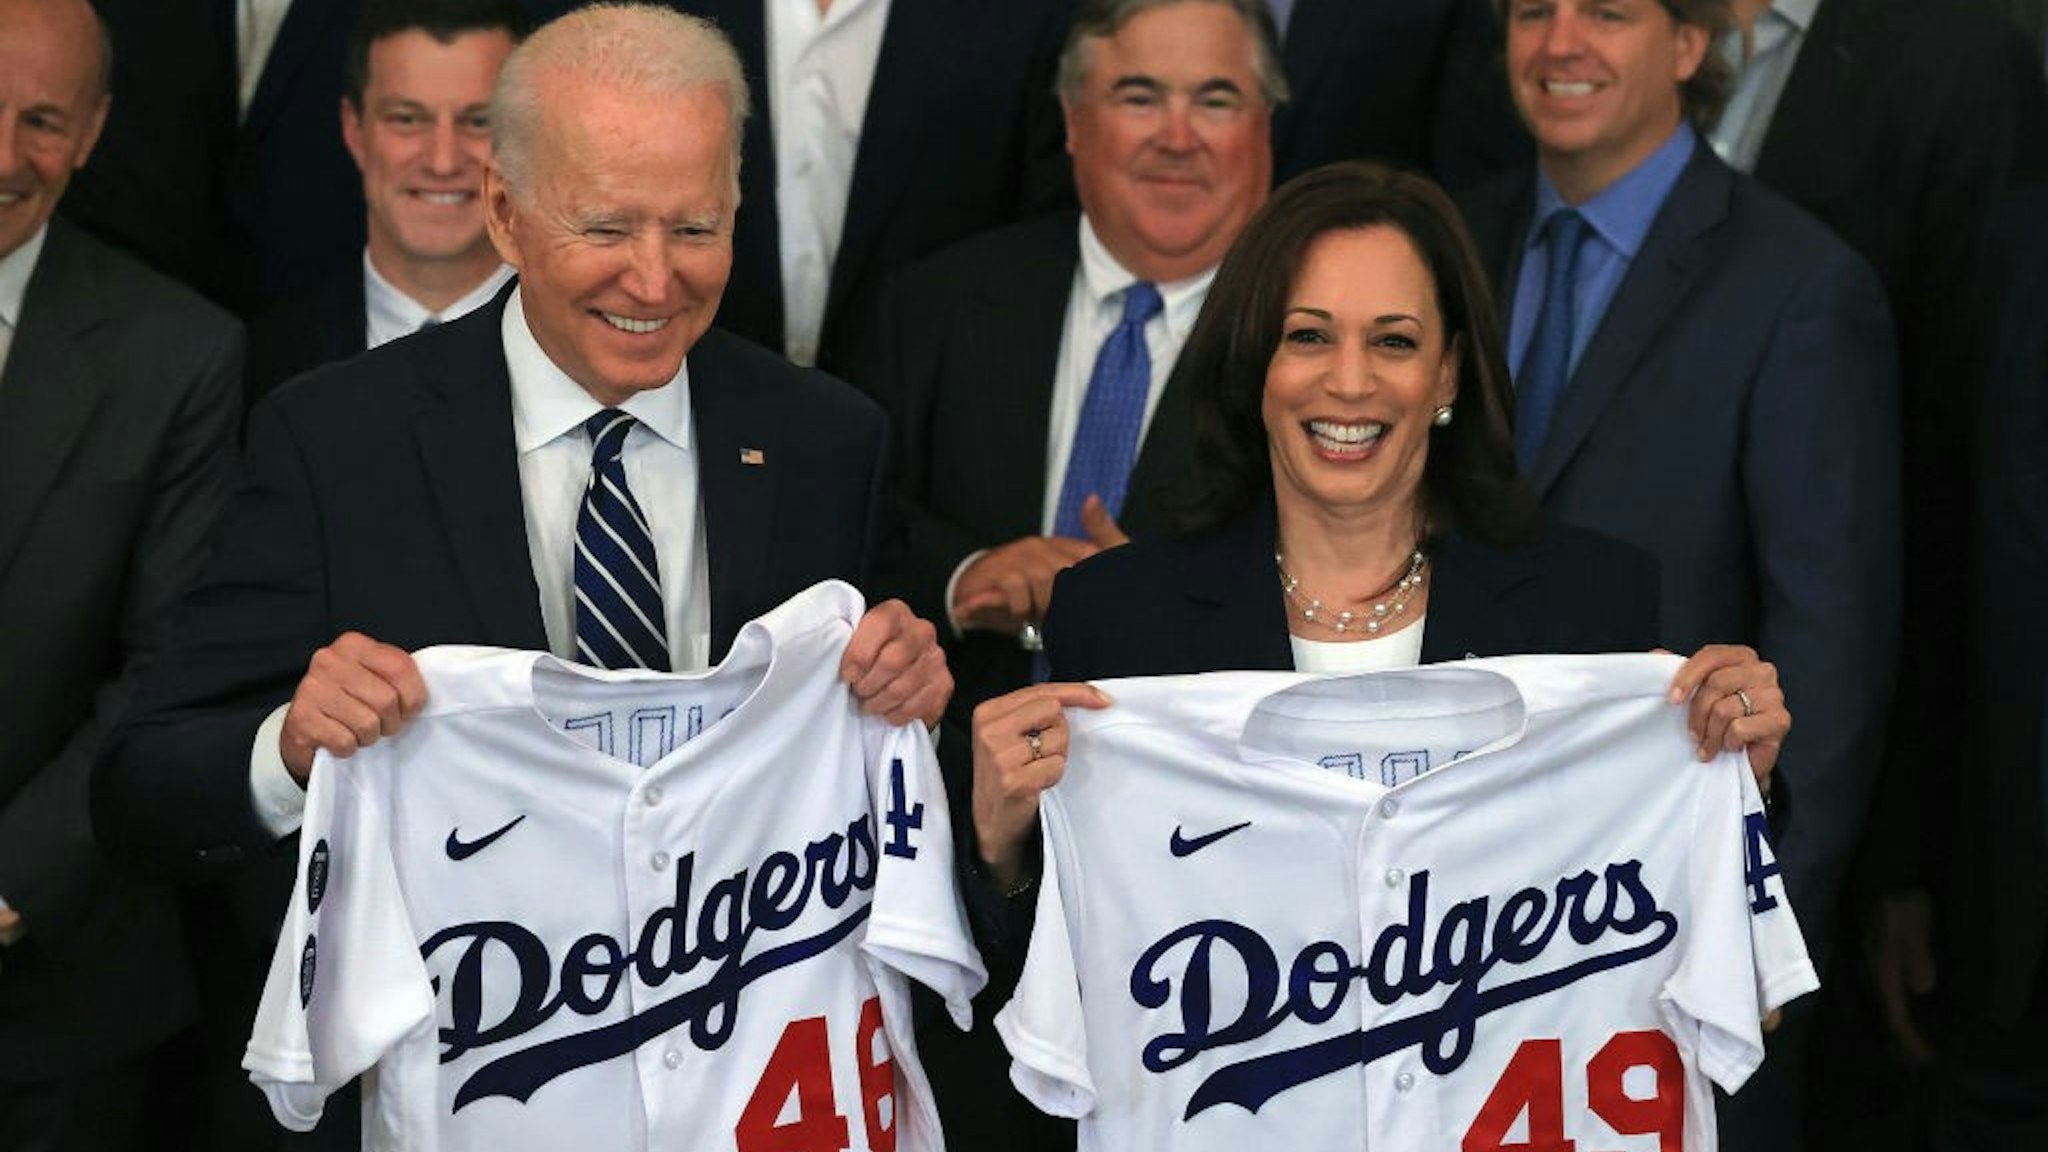 WASHINGTON, DC - JULY 02: U.S. President Joe Biden and Vice President Kamala Harris pose with the jerseys given to them by the 2020 World Series champion Los Angeles Dodgers during a congratulatory event in the East Room of the White House on July 02, 2021 in Washington, DC. The Dodgers defeated the Tampa Bay Rays to win the championship series at the end of an abbreviated season due to the coronavirus. (Photo by